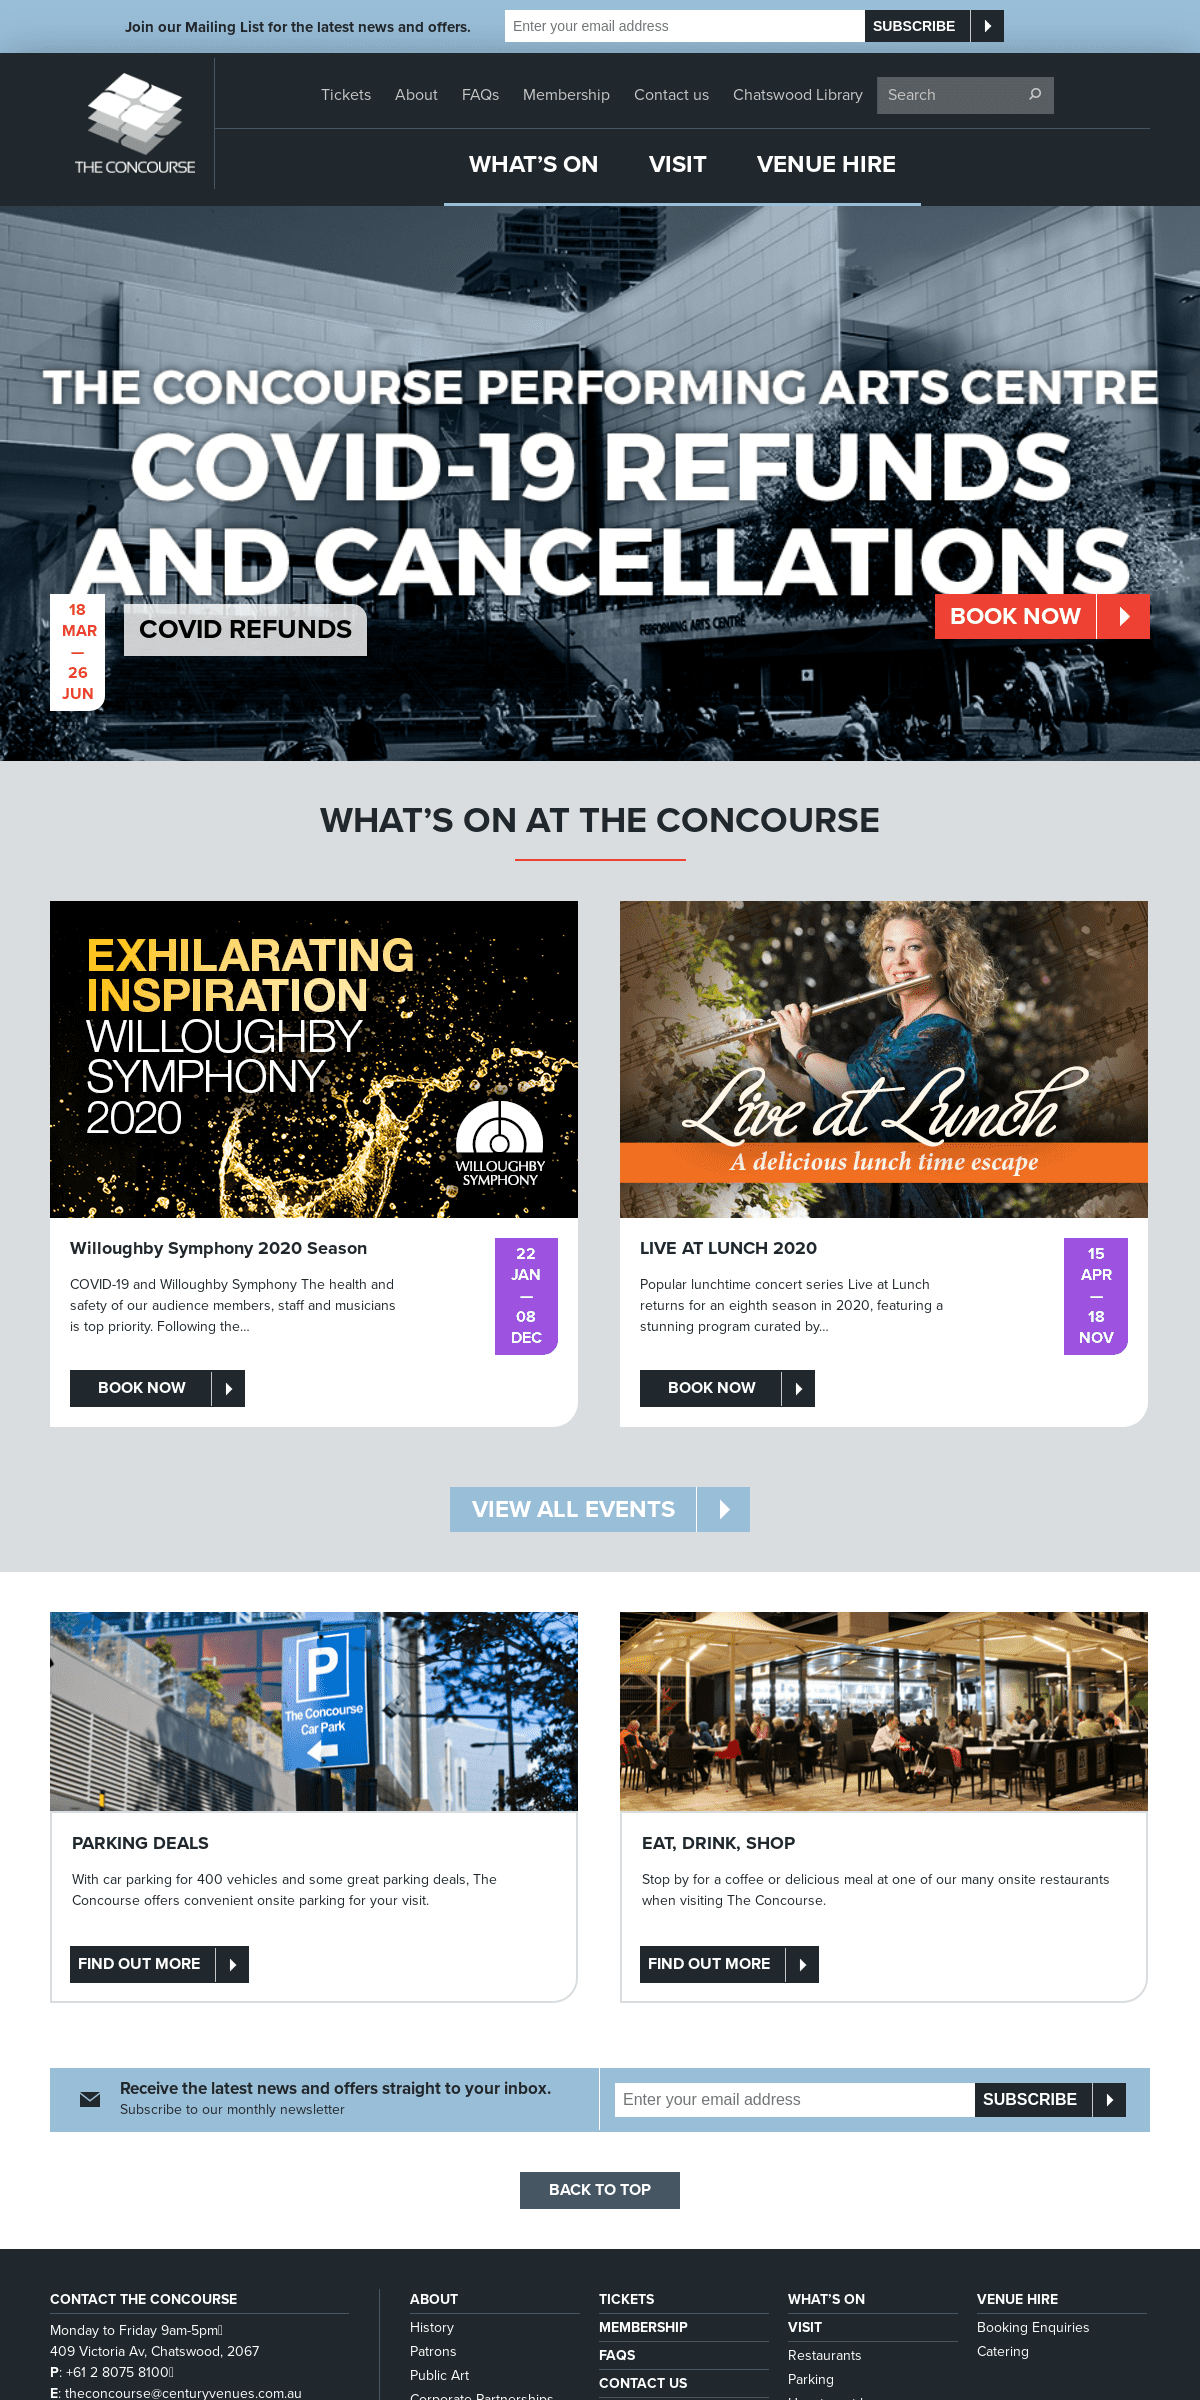 A complete backup of theconcourse.com.au